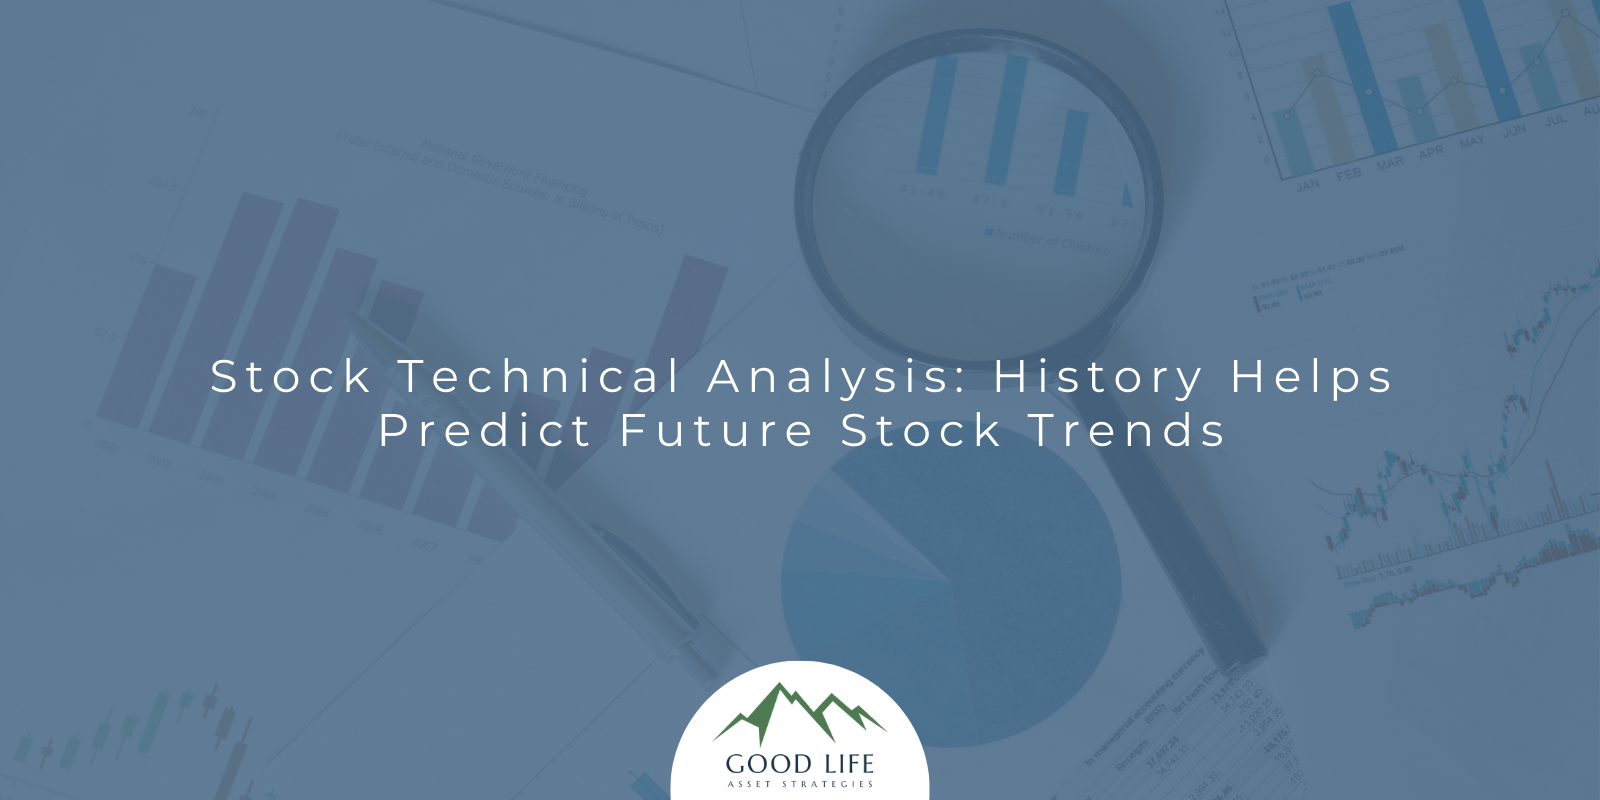 Stock Technical Analysis: History Helps Predict Future Stock Trends